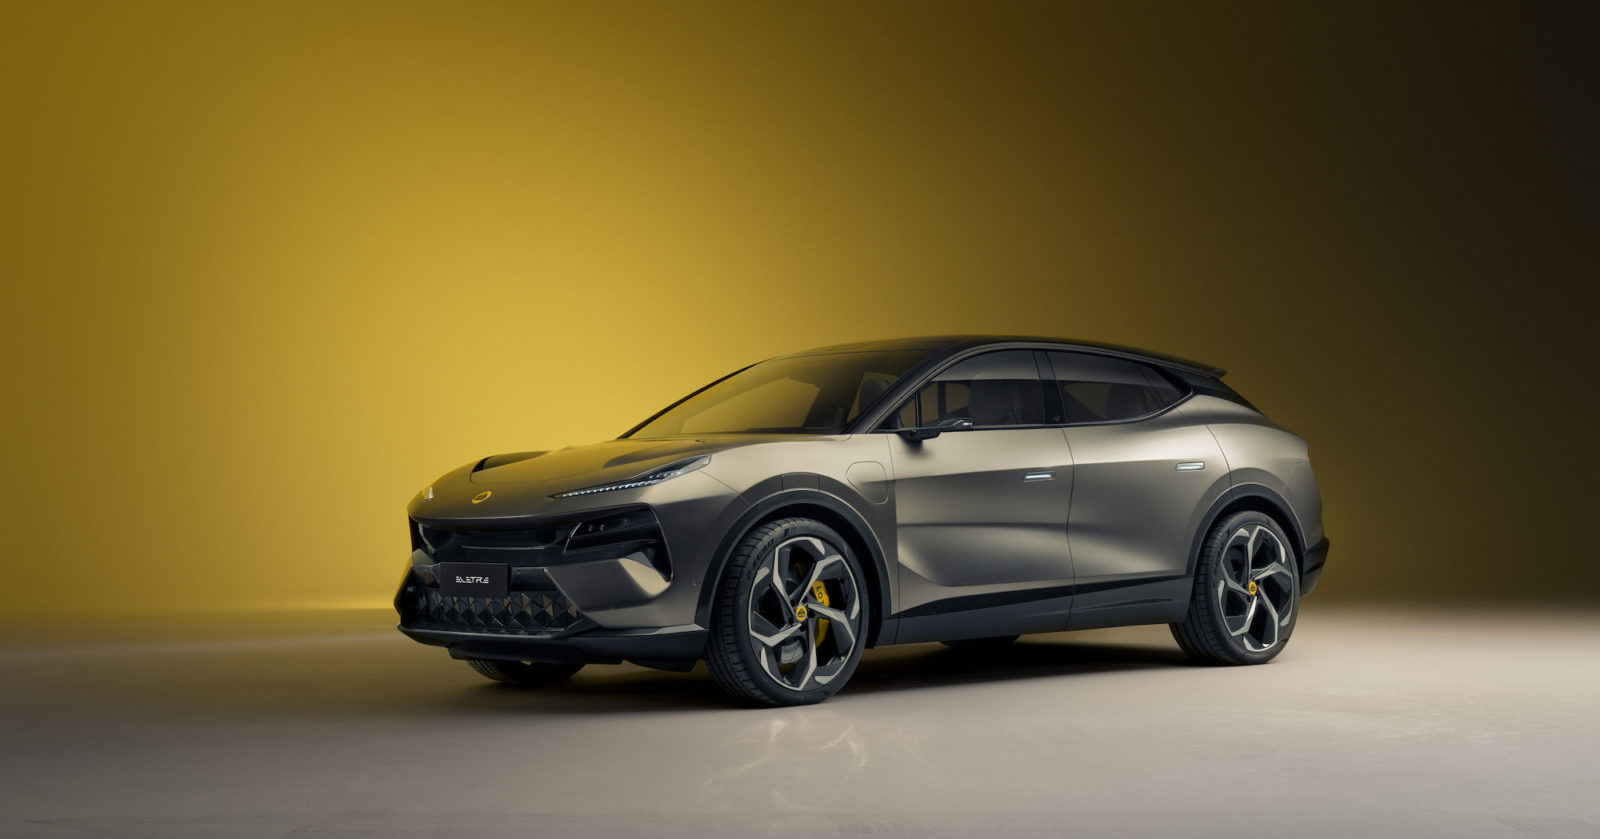 The world’s first electric hyper-SUV is here